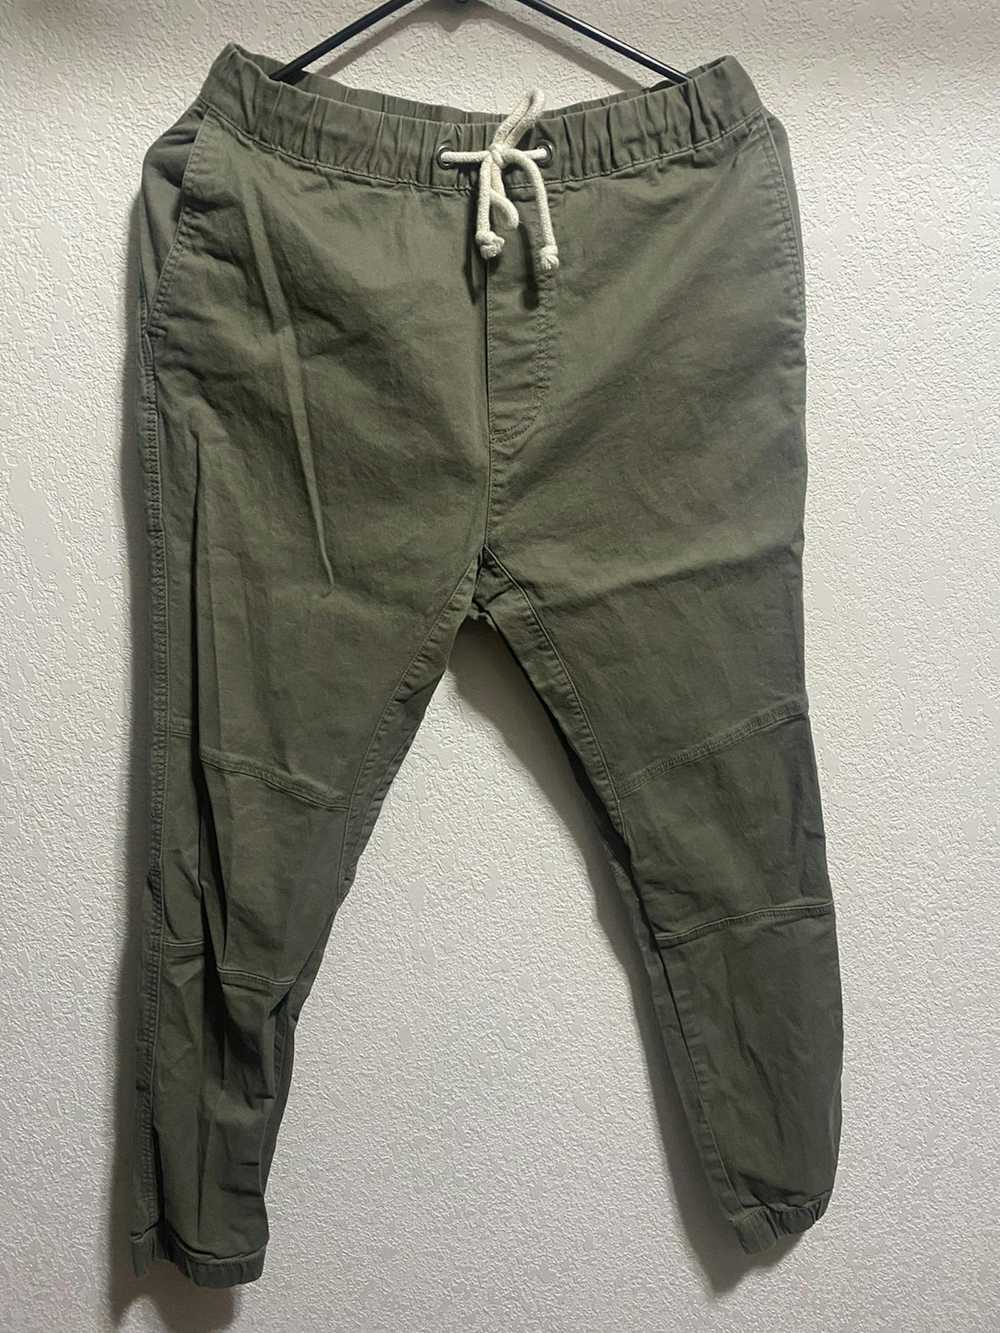 Divided × H&M Causal Pants by H&M Divided - image 1